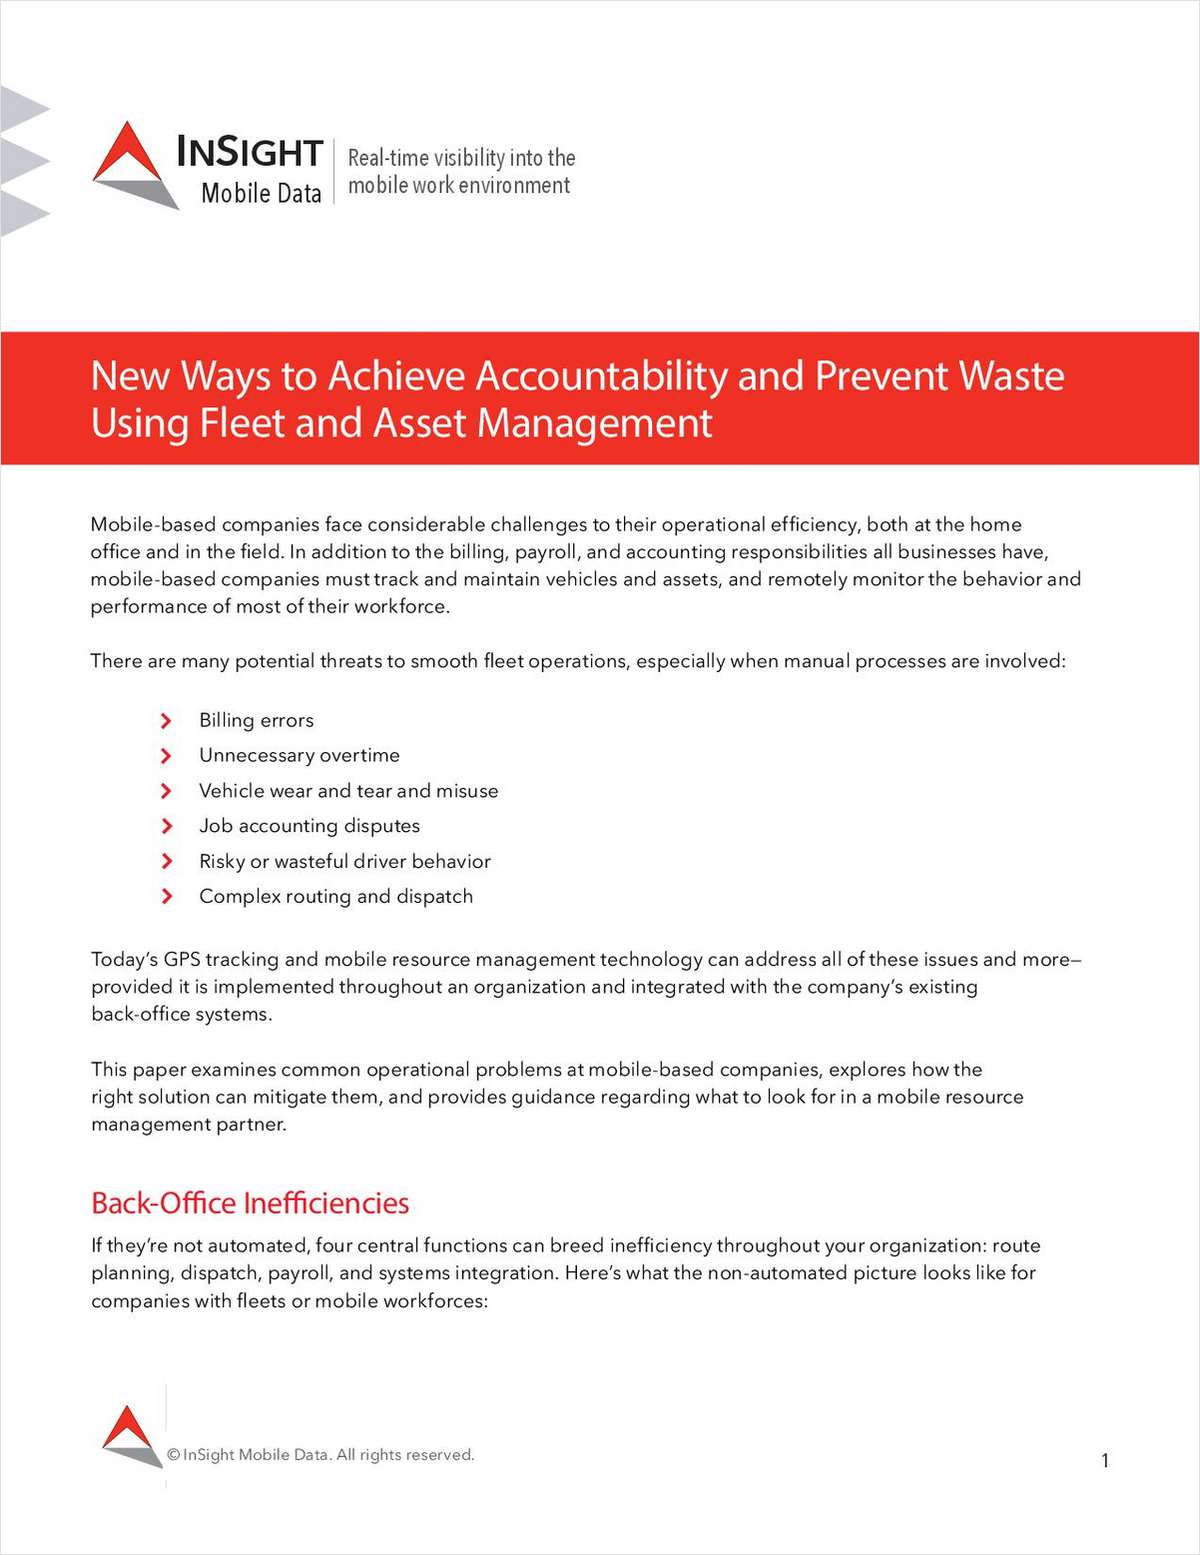 New Ways to Achieve Accountability and Prevent Waste Using Fleet and Asset Management